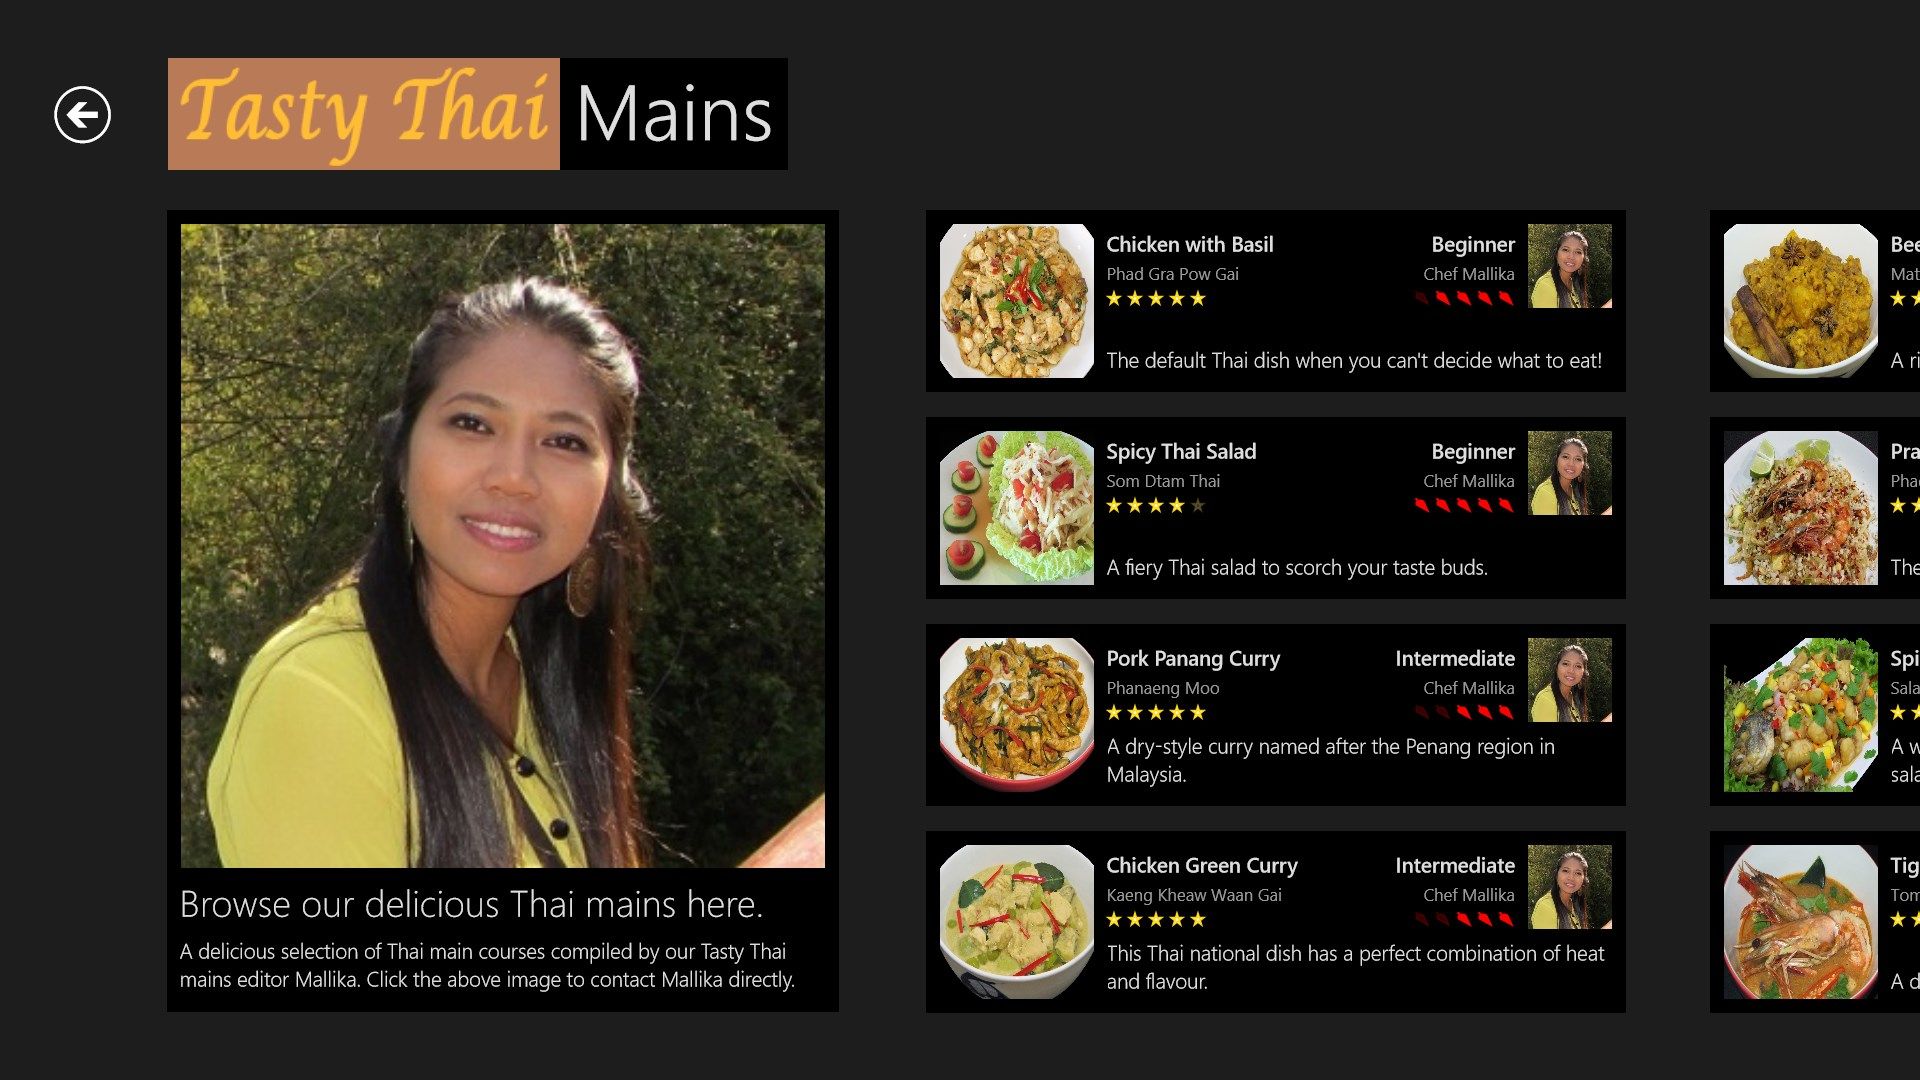 The Mains browser screen allows you to easily compare recipe characteristics.